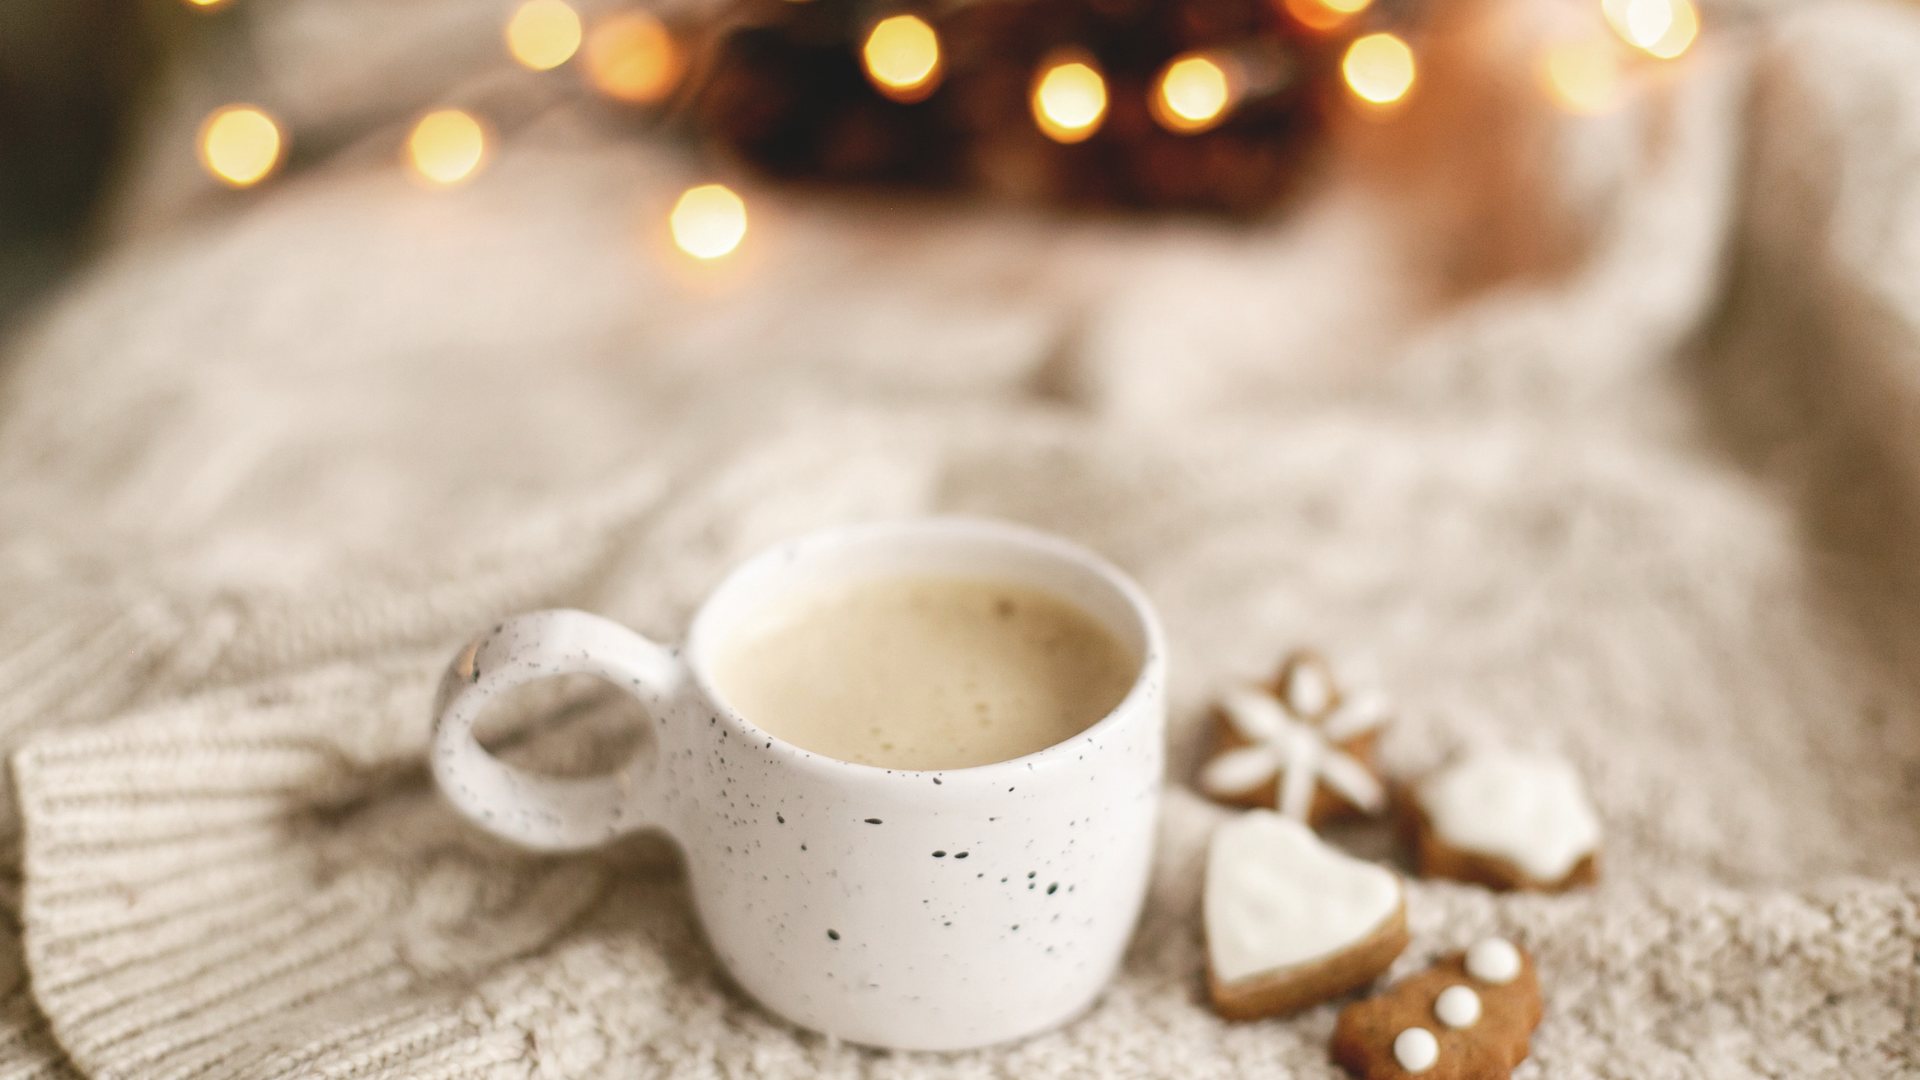 Discover How Mindfulness Can Help You Enjoy Christmas More